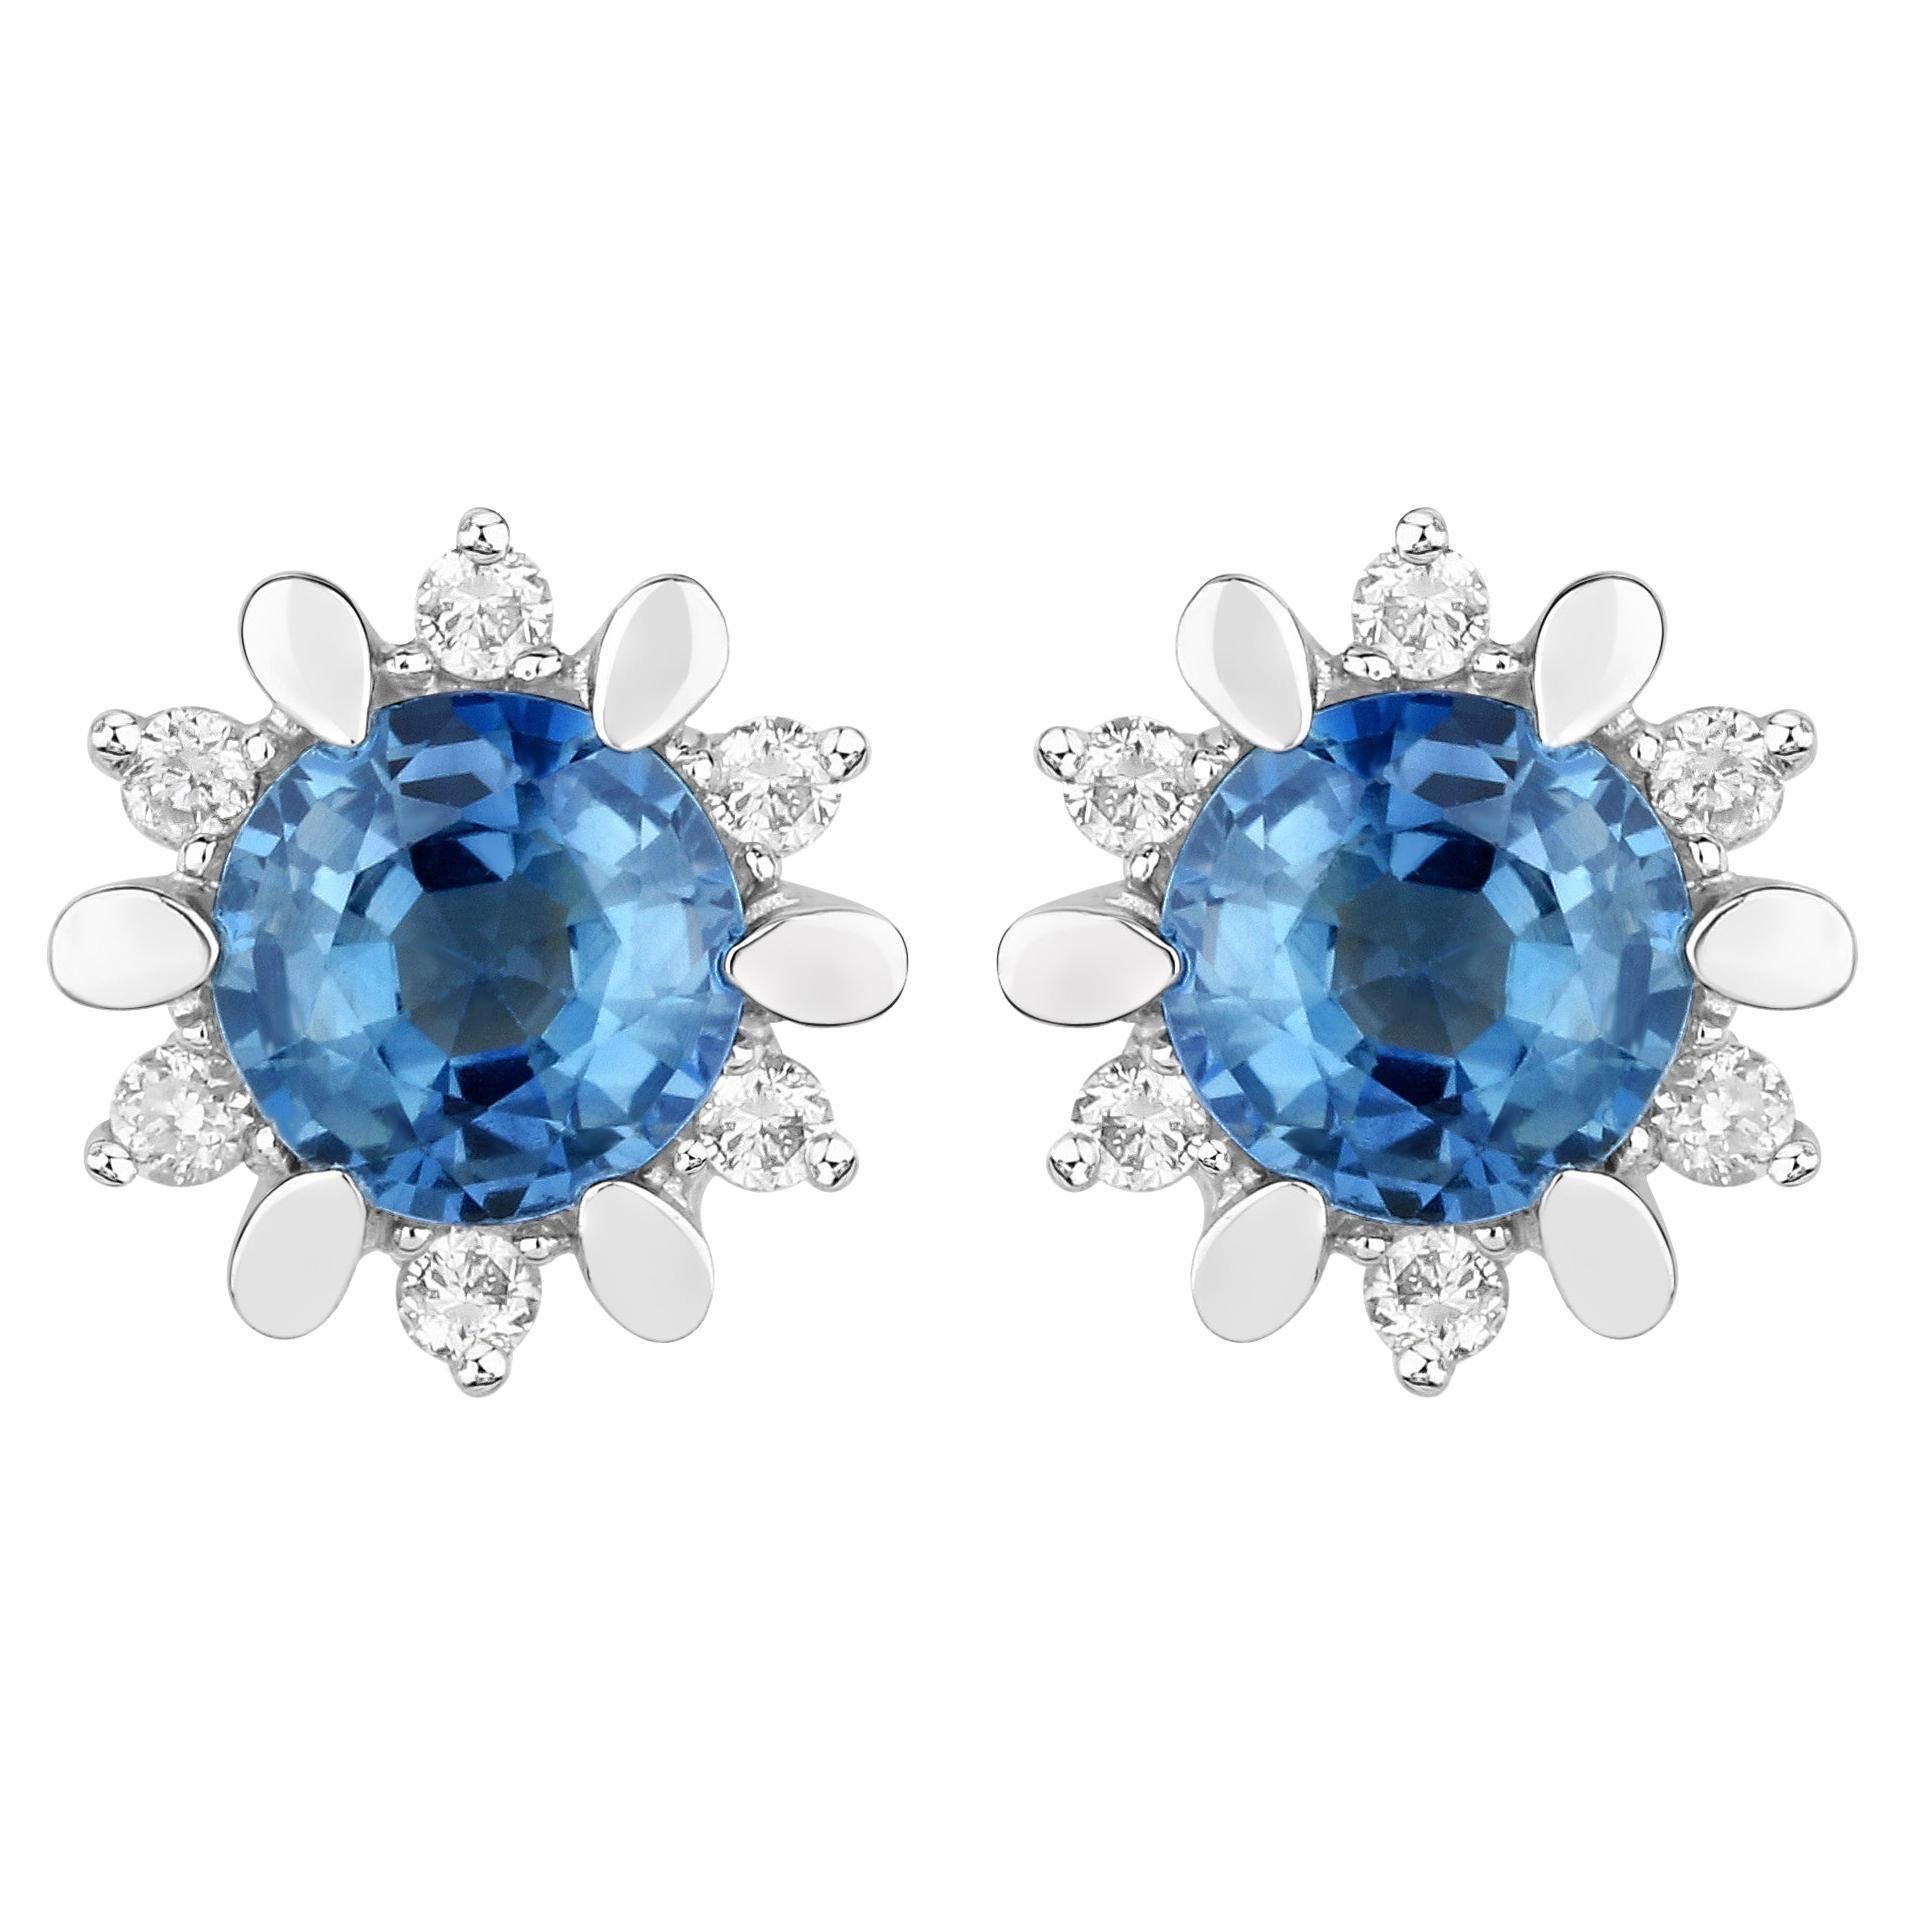 Natural Blue Sapphire and Diamond Stud Earrings Total 1.90 Carats 14K White Gold